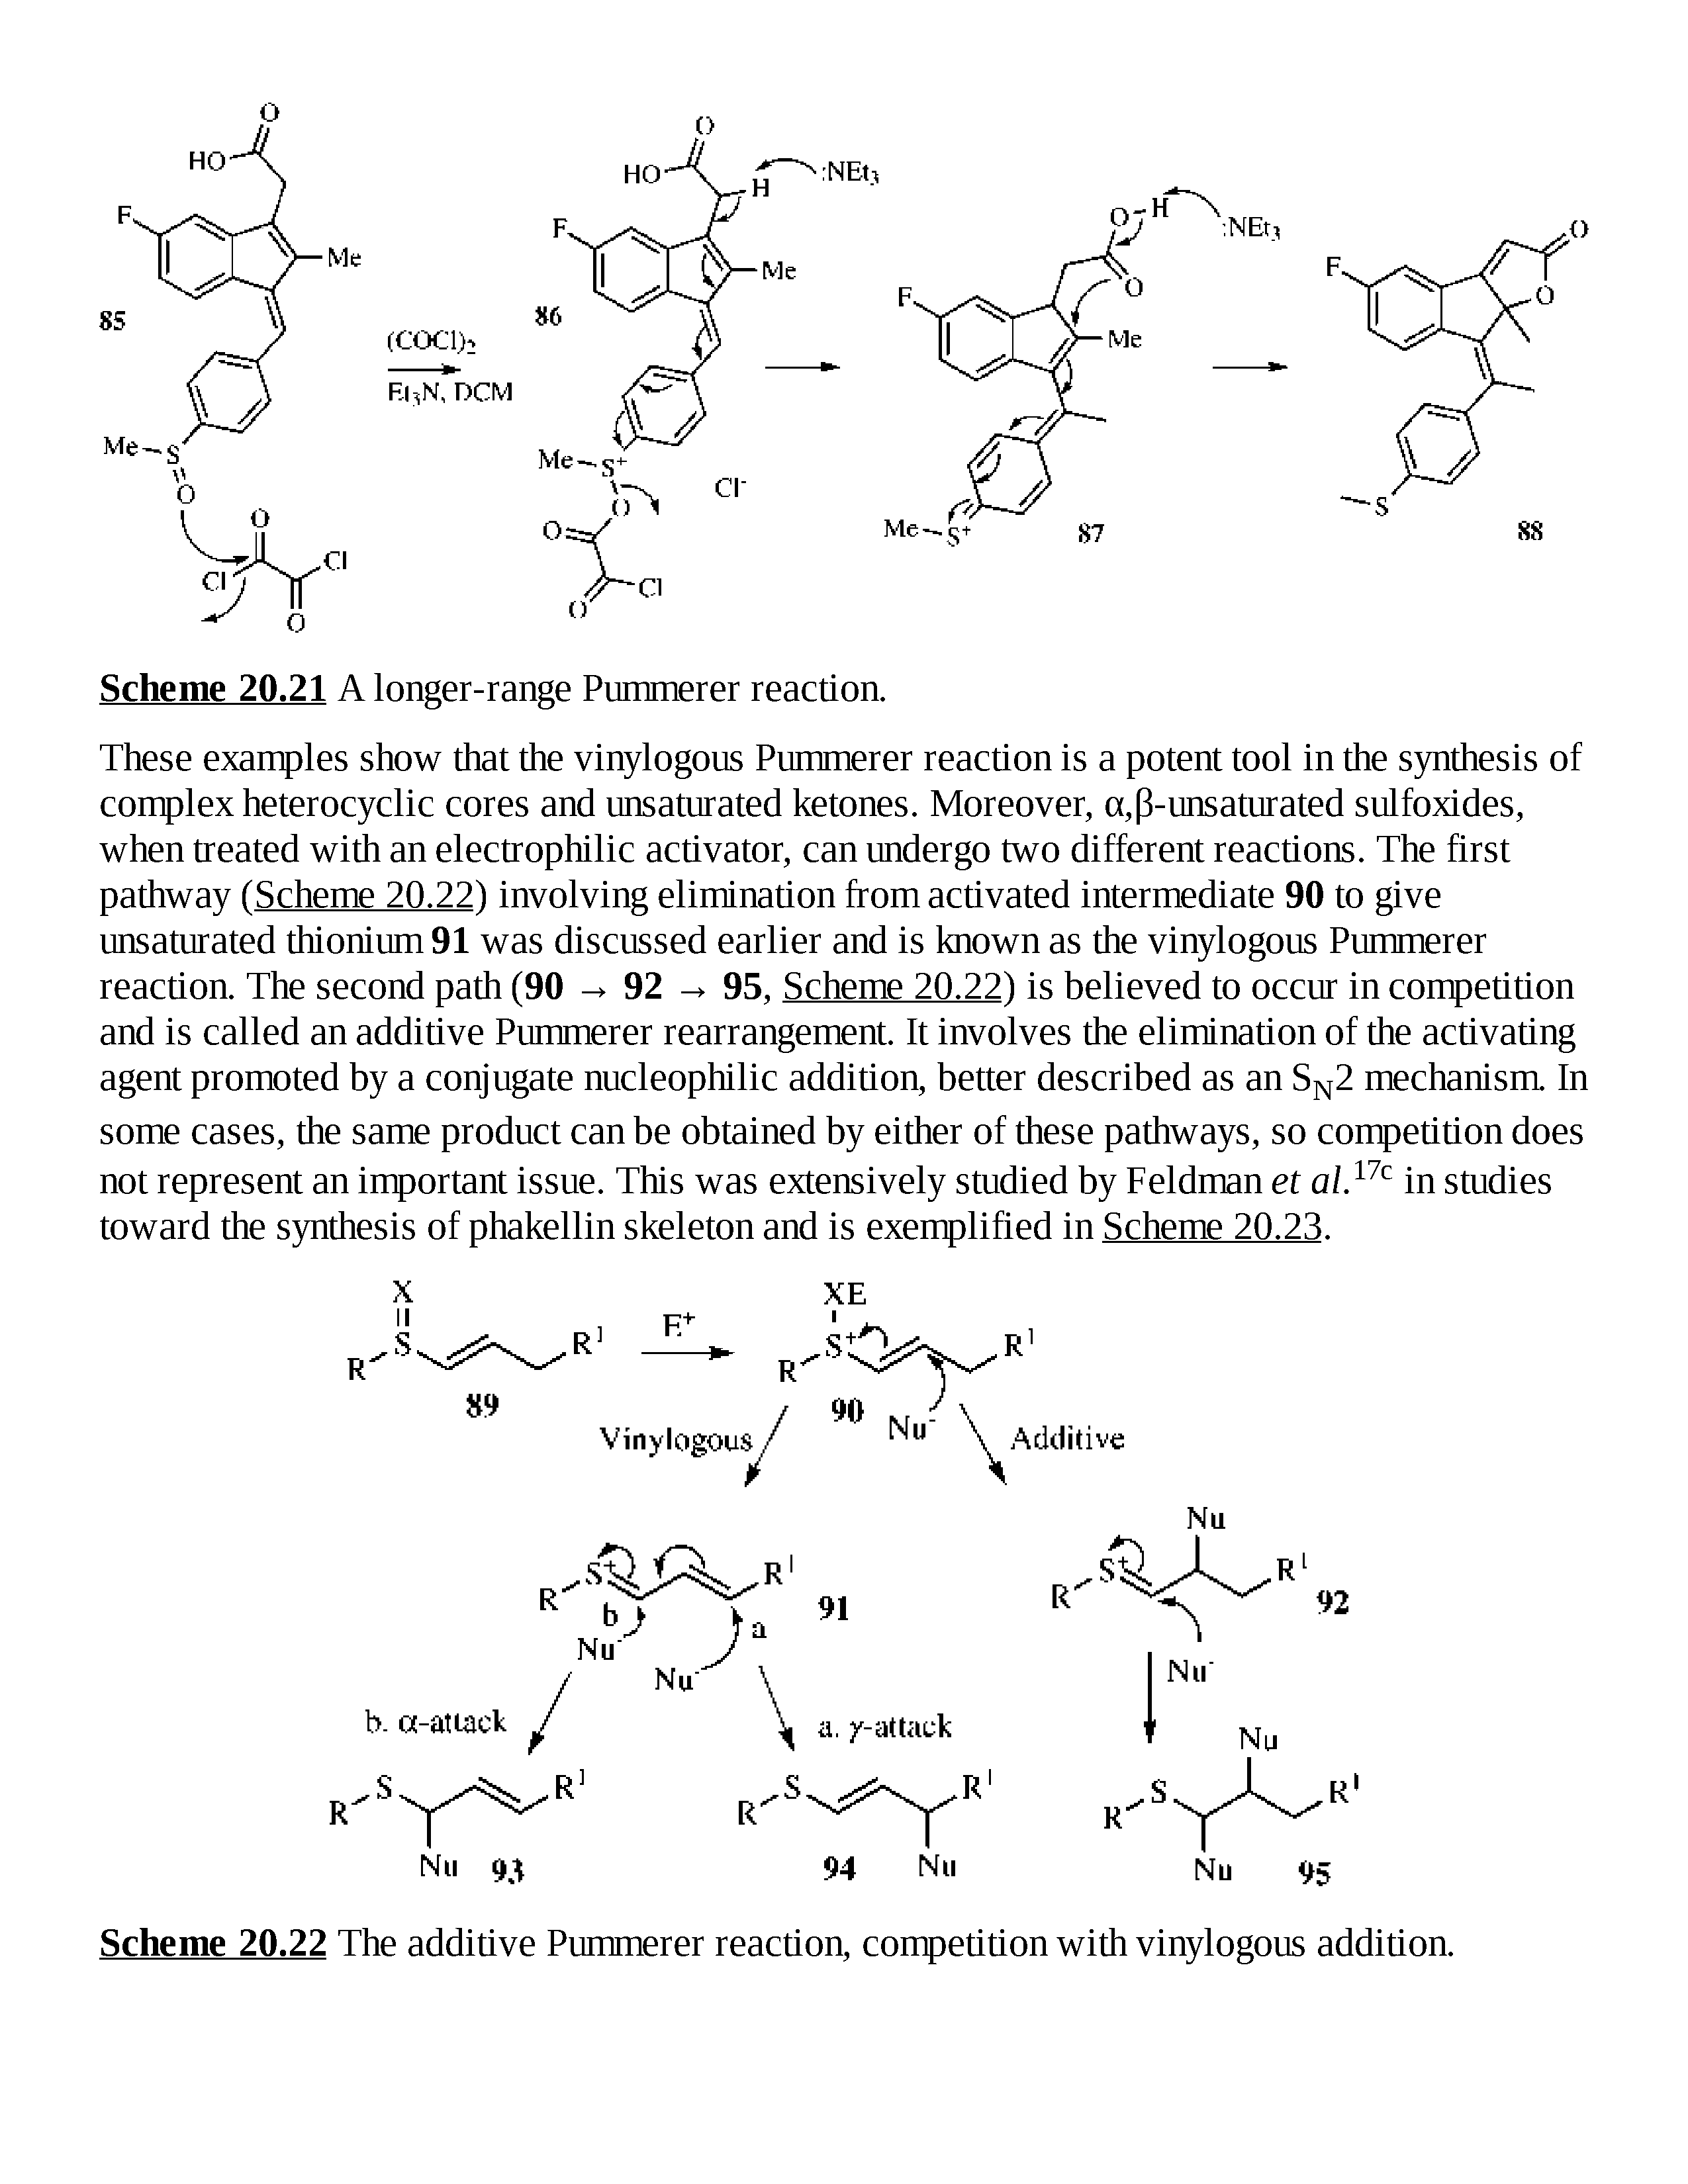 Scheme 20.22 The additive Pummerer reaction, competition with vinylogous addition.